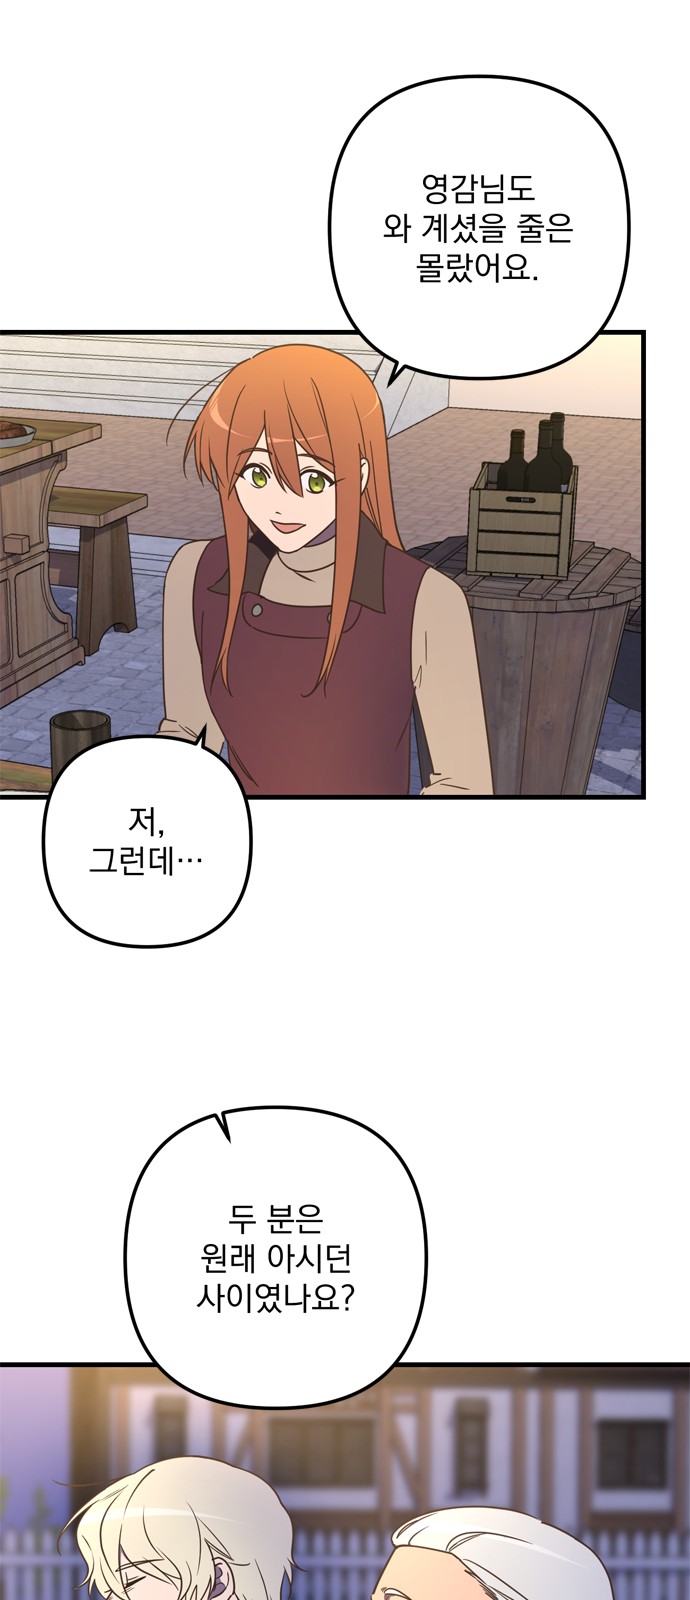 Single Wizard's Dormitory Apartment - Chapter 69 - Page 42